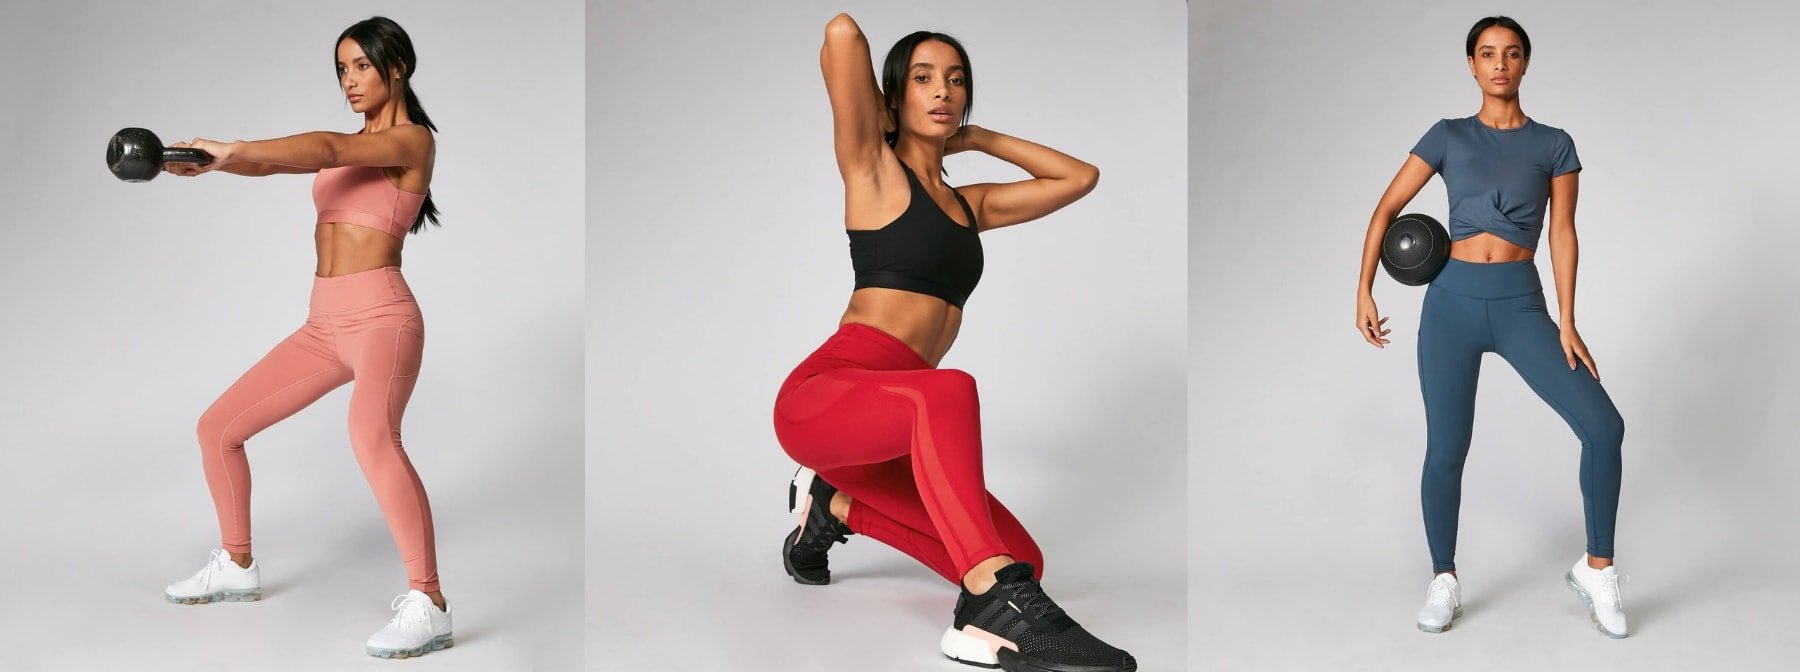 4 Leggings To Cover Every Training Type ­— *Adds All To Basket*